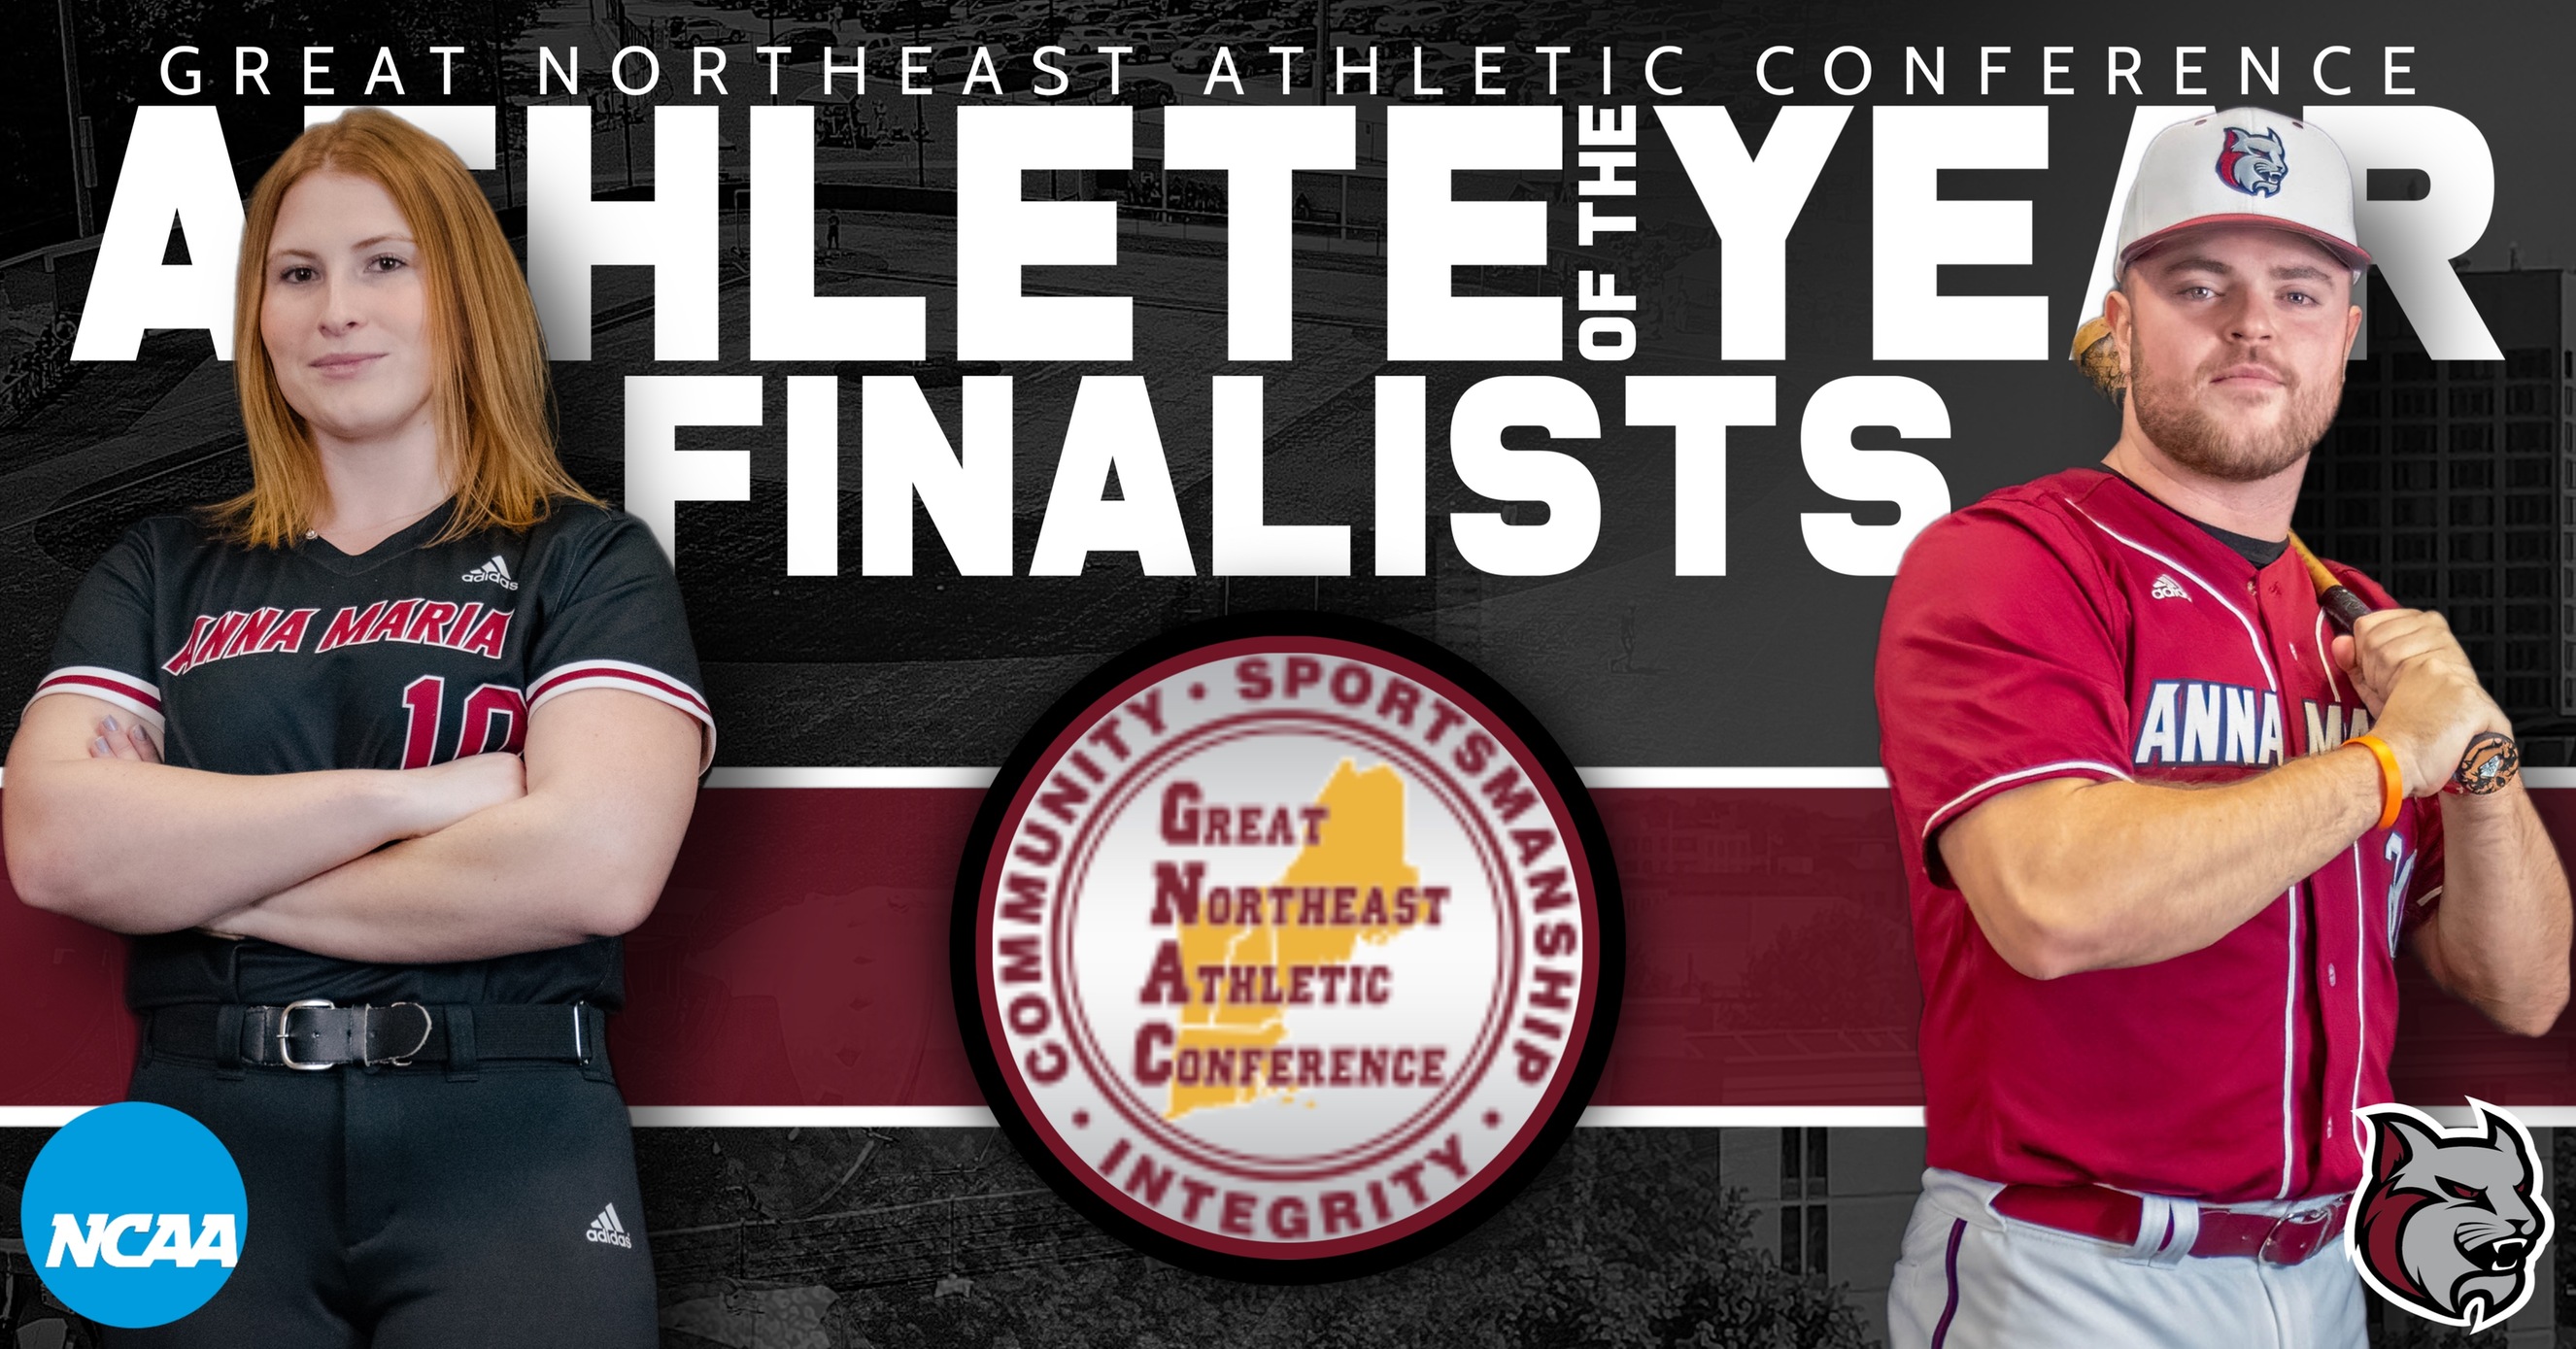 Garcia And Marifiote Named Finalists For GNAC Men's And Women's Athlete of the Year